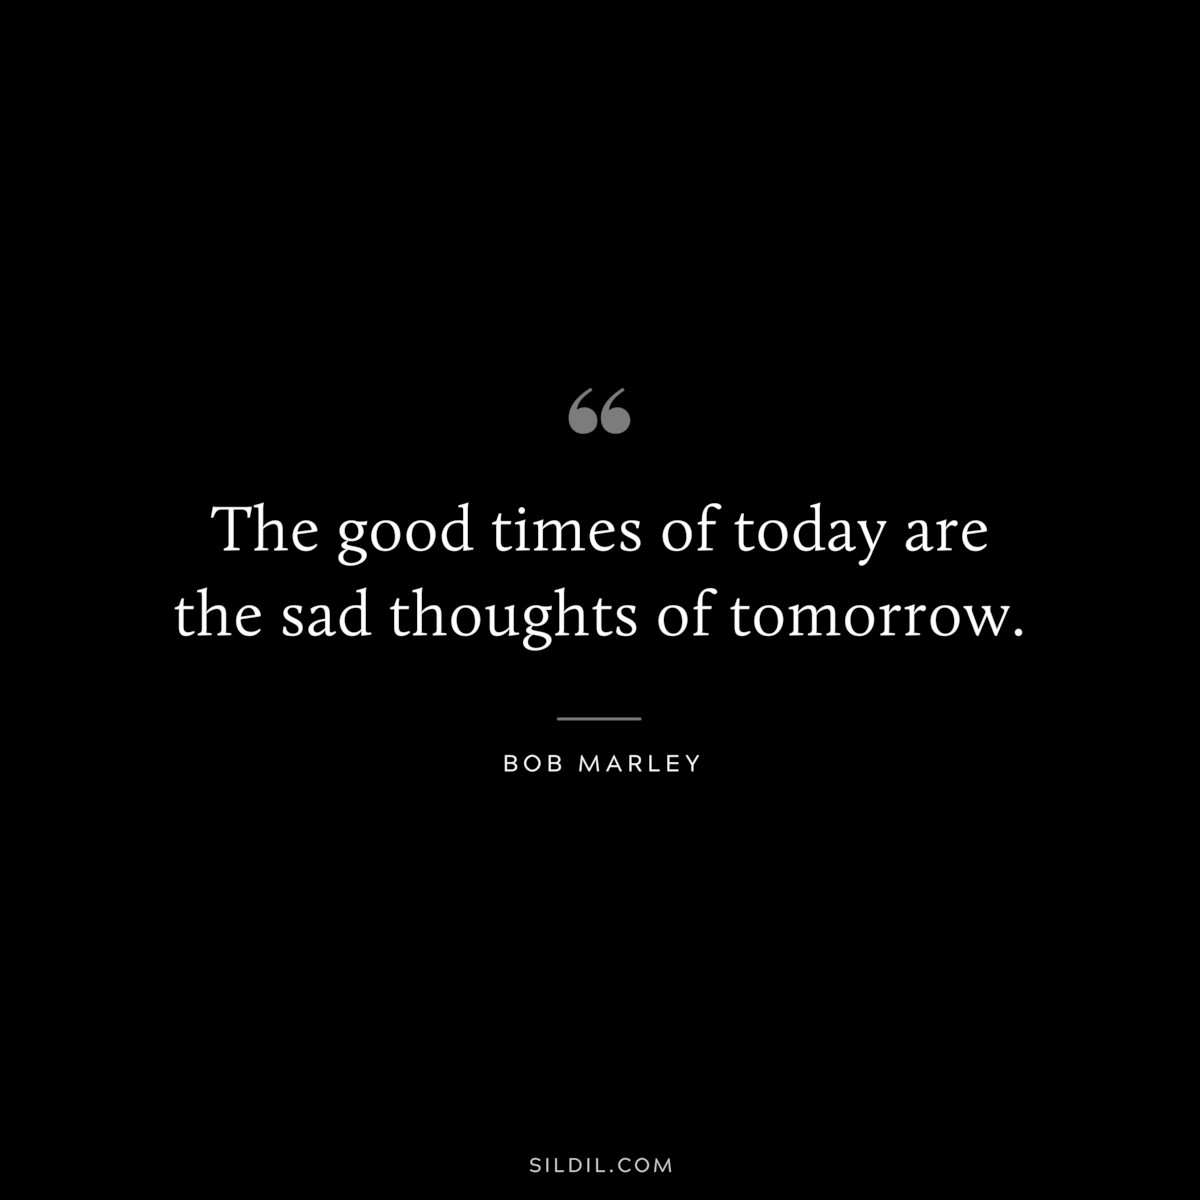 The good times of today are the sad thoughts of tomorrow. ― Bob Marley